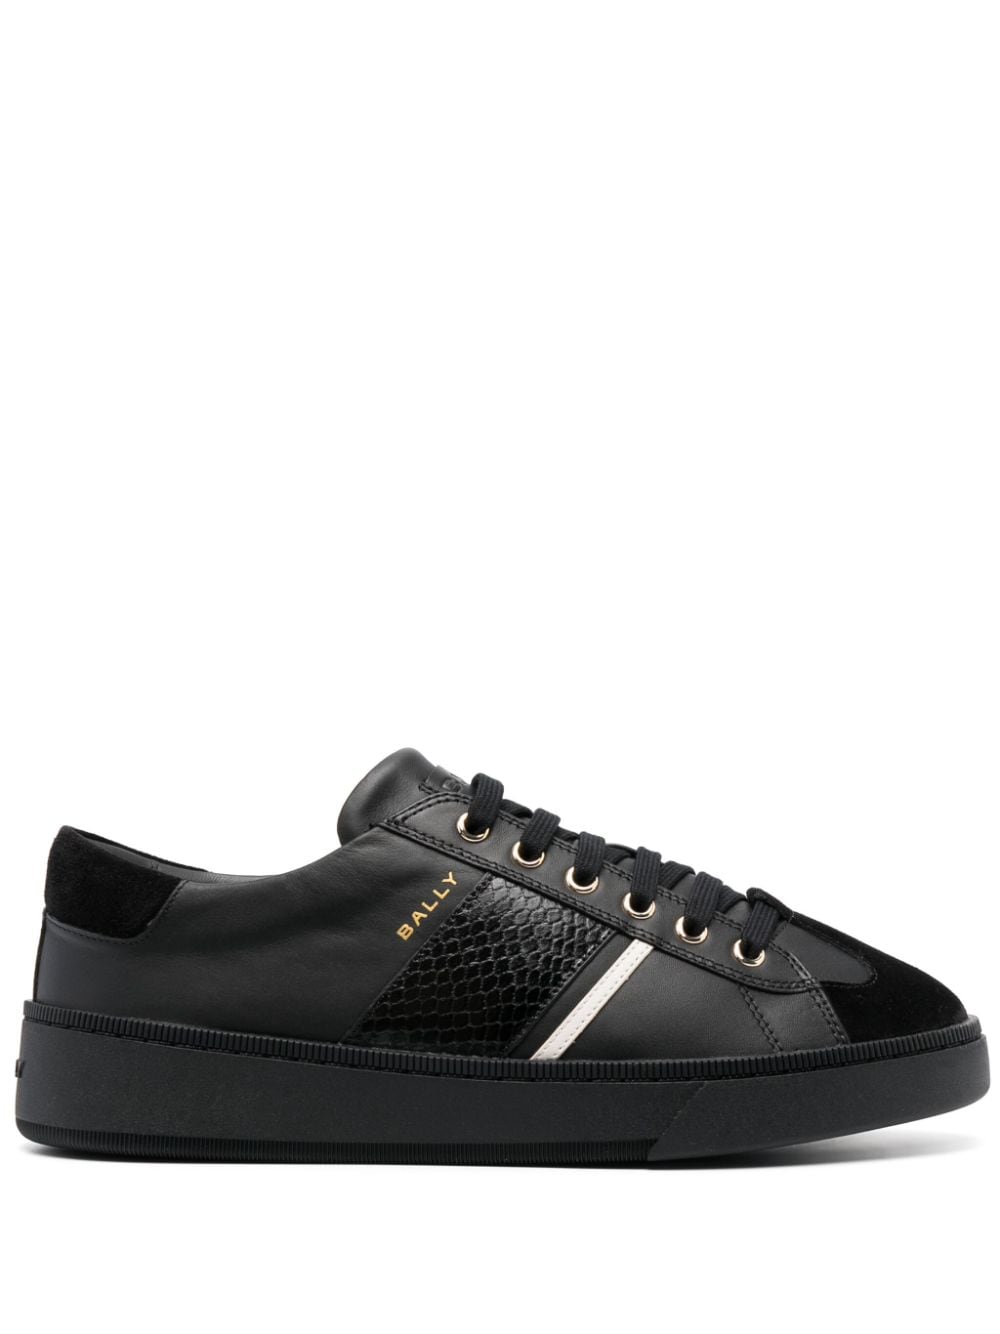 Bally Roller P low-top leather sneakers - Black von Bally